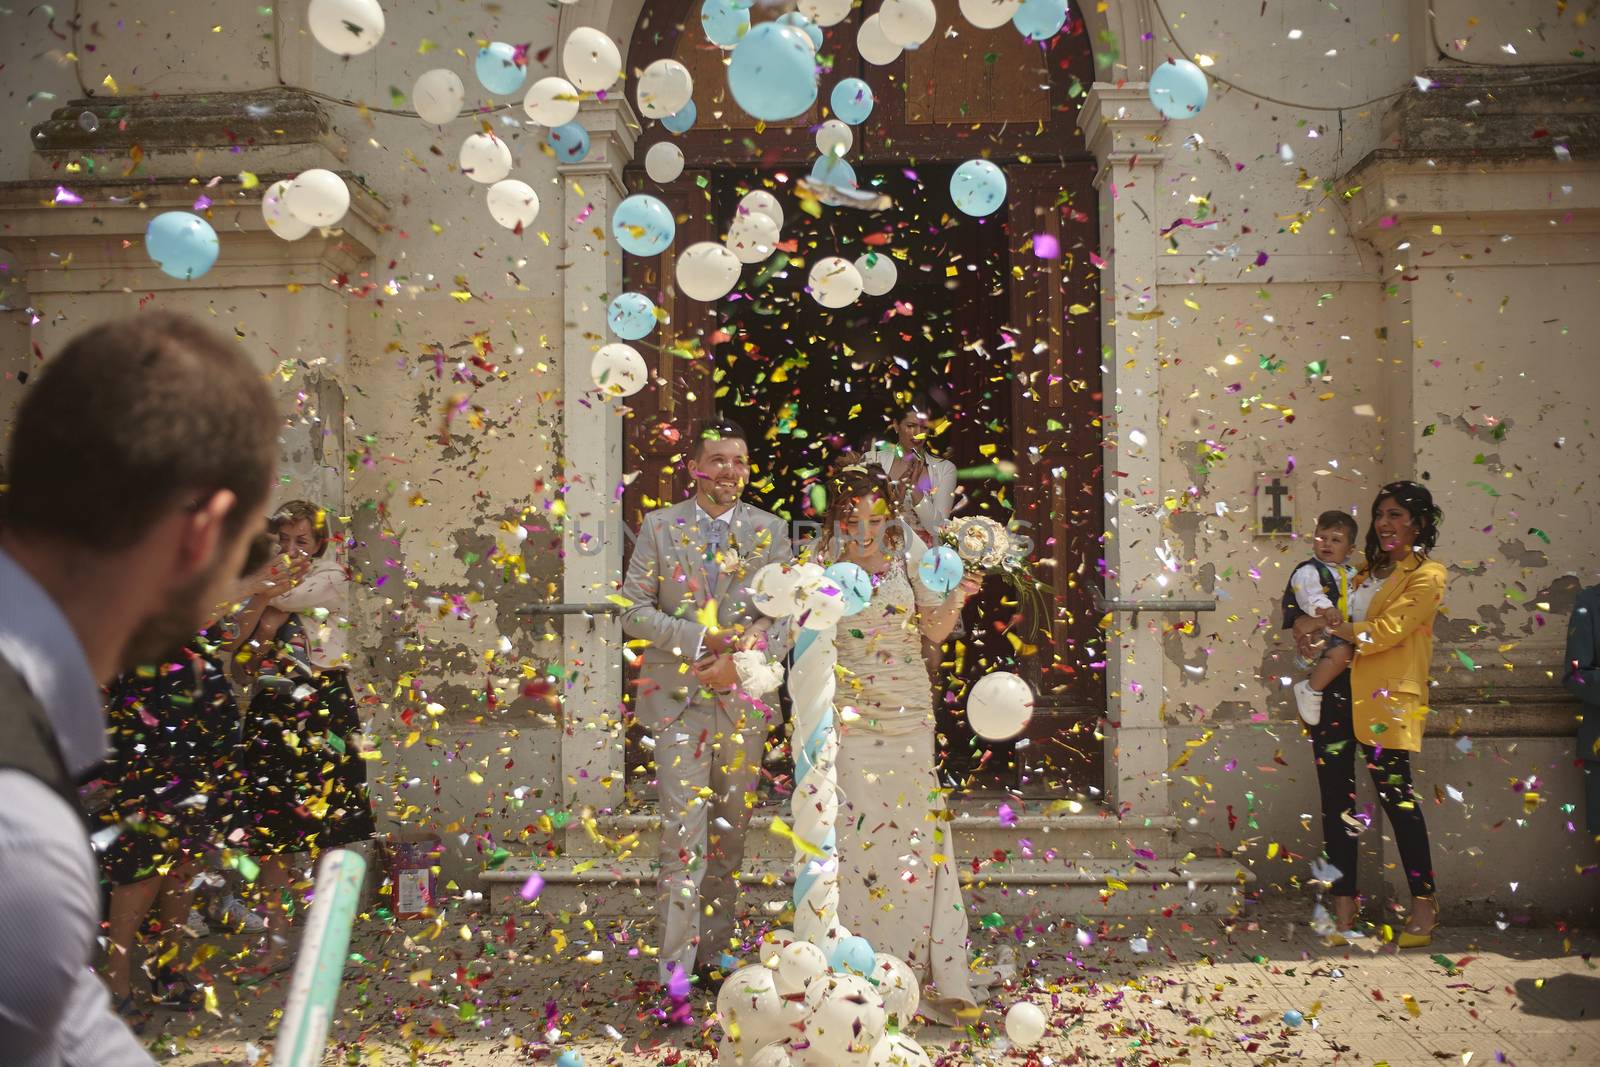 Newlyweds outside the church with confetti and rice throwing